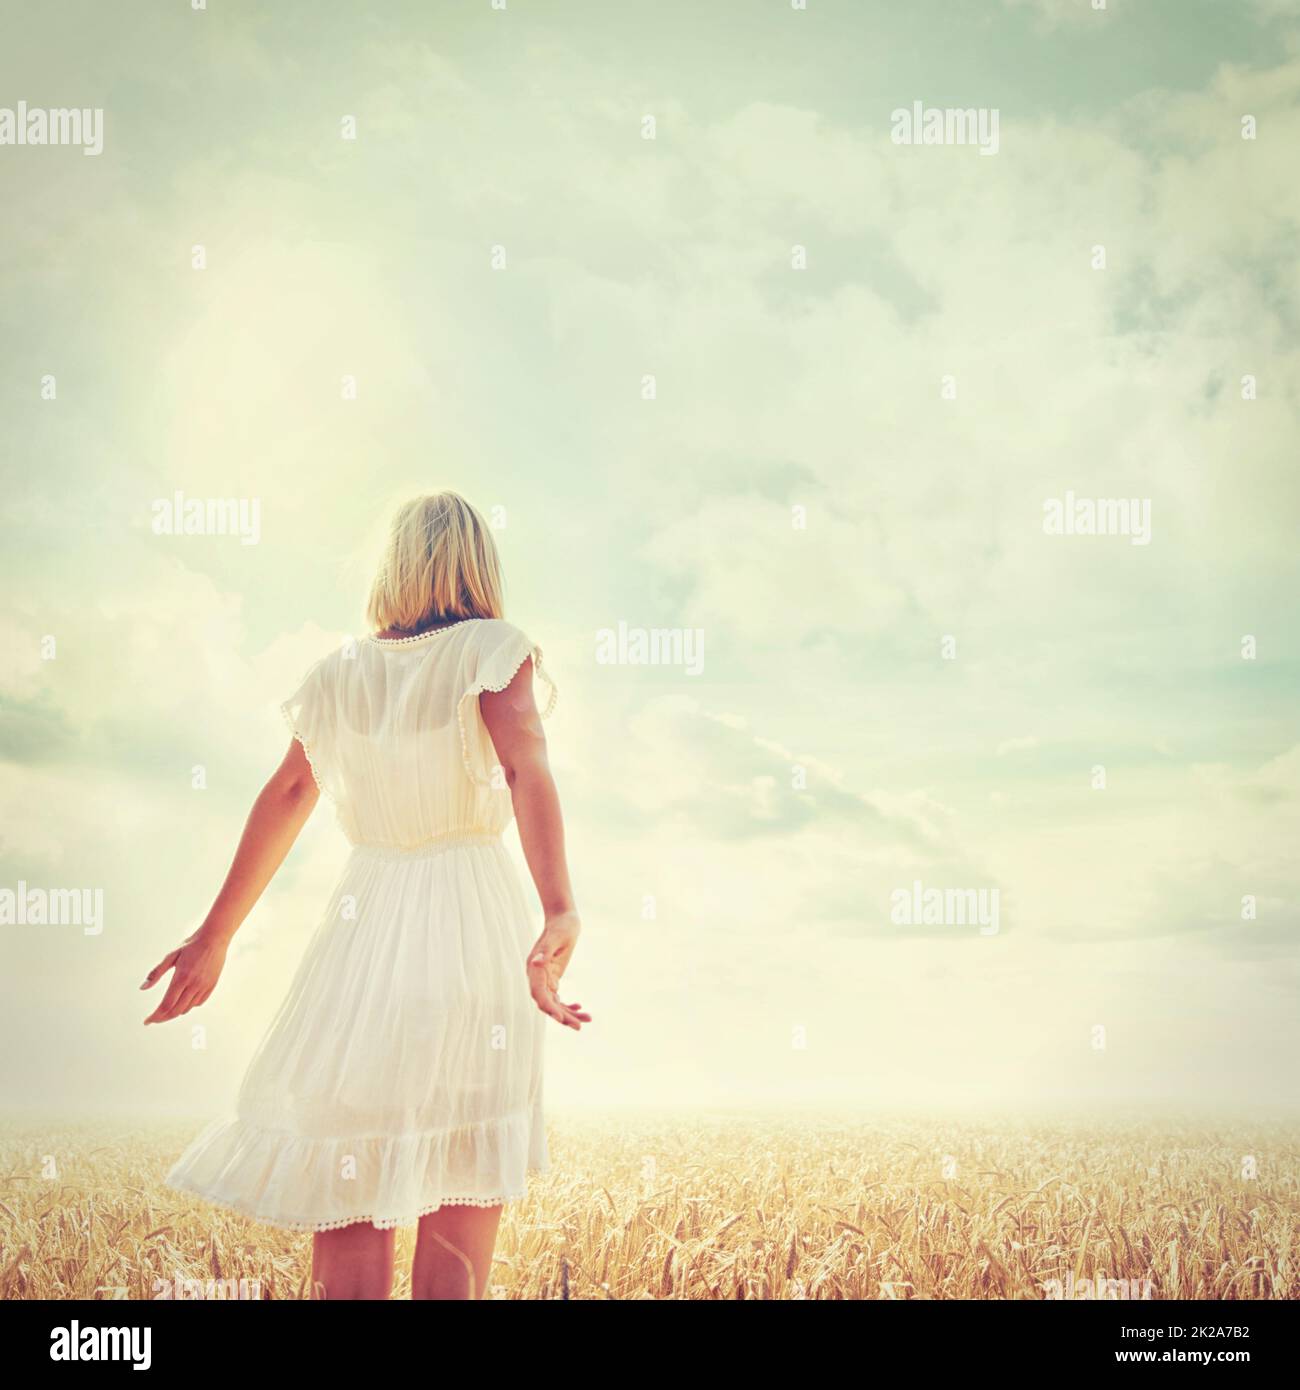 Feeling free and filled with wellbeing. Rear view shot of a carefree woman in a field. Stock Photo